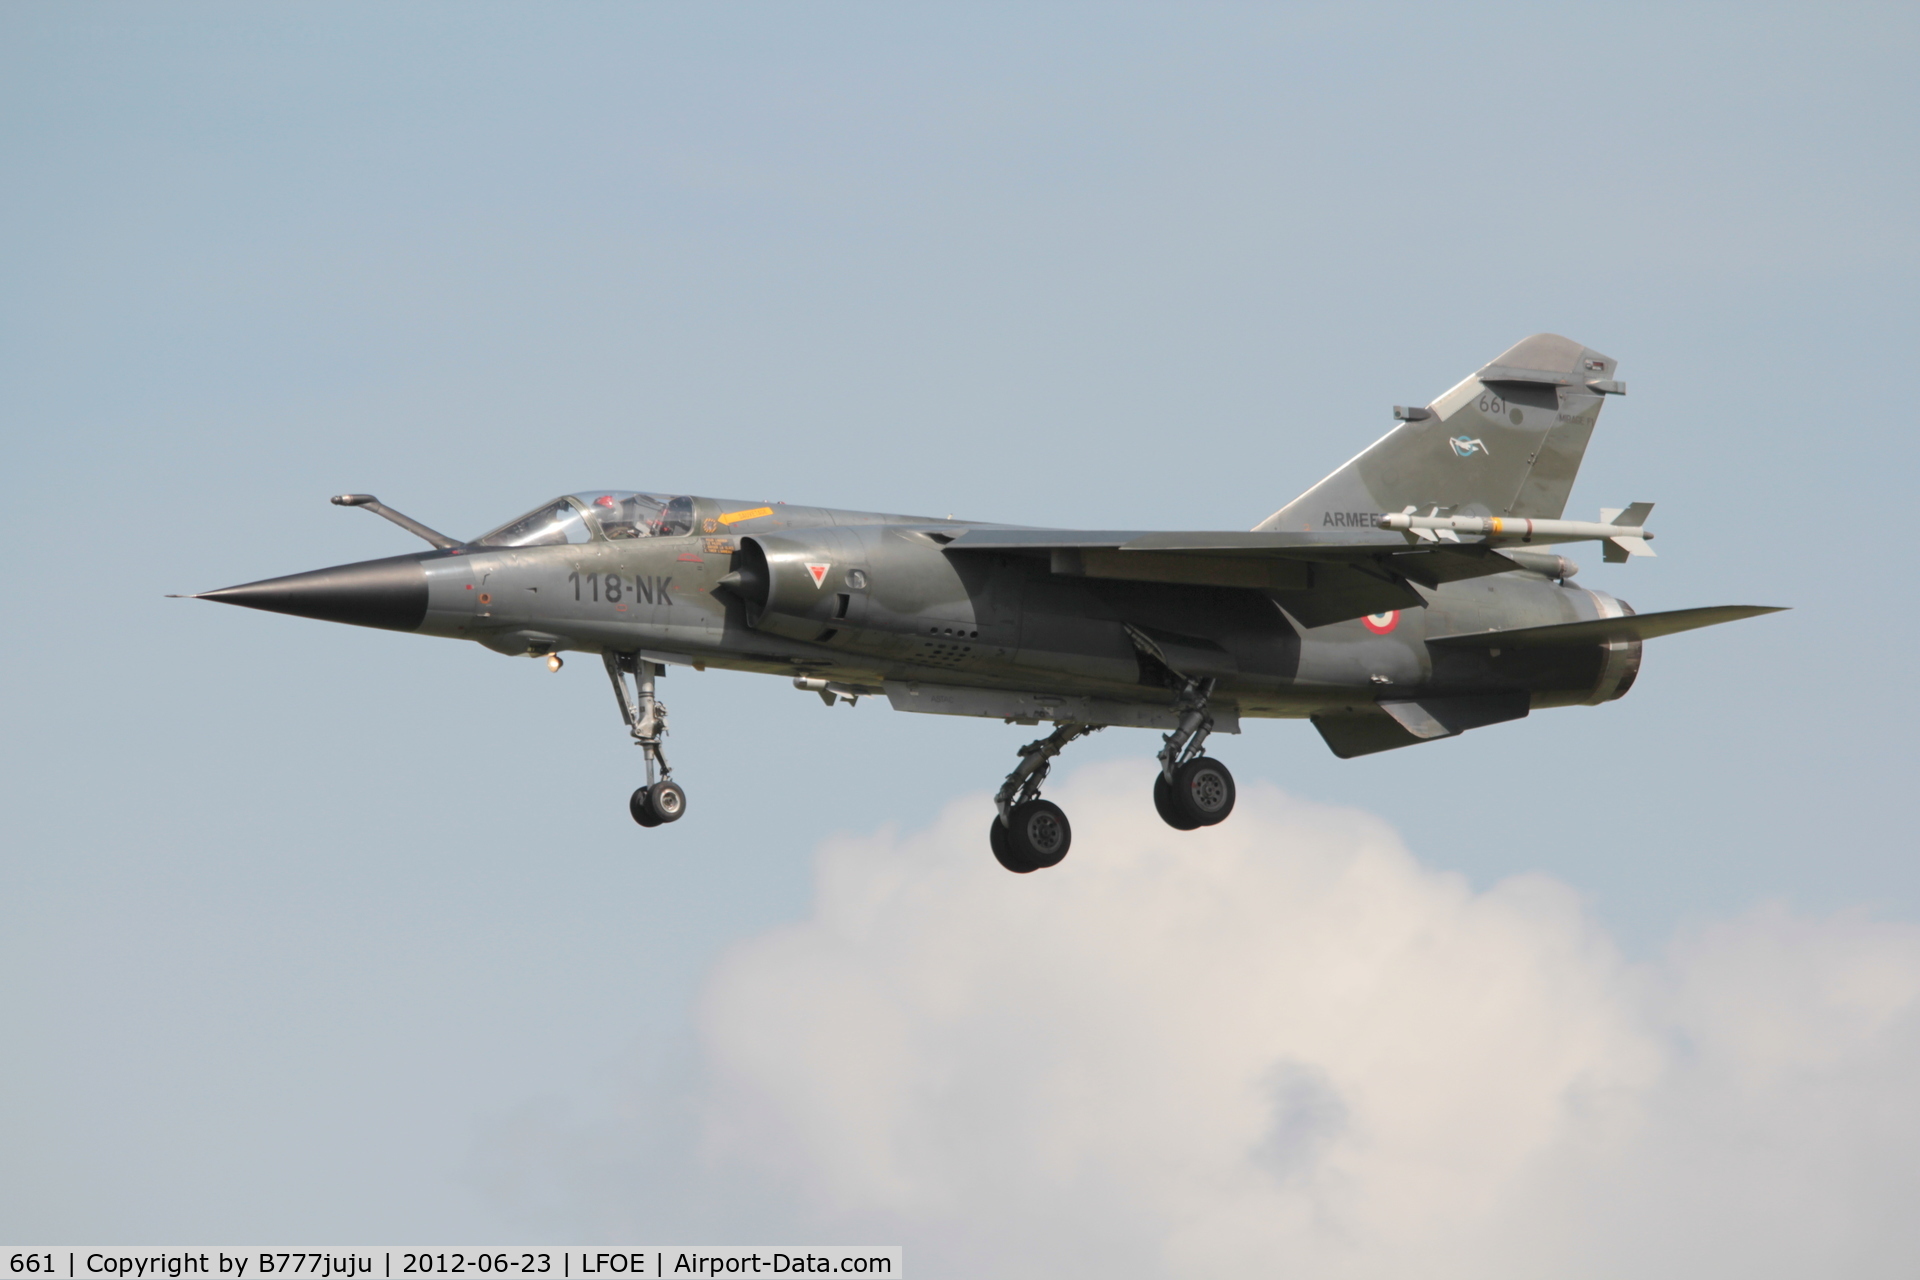 661, Dassault Mirage F.1CR C/N 661, with new military code 118-NK